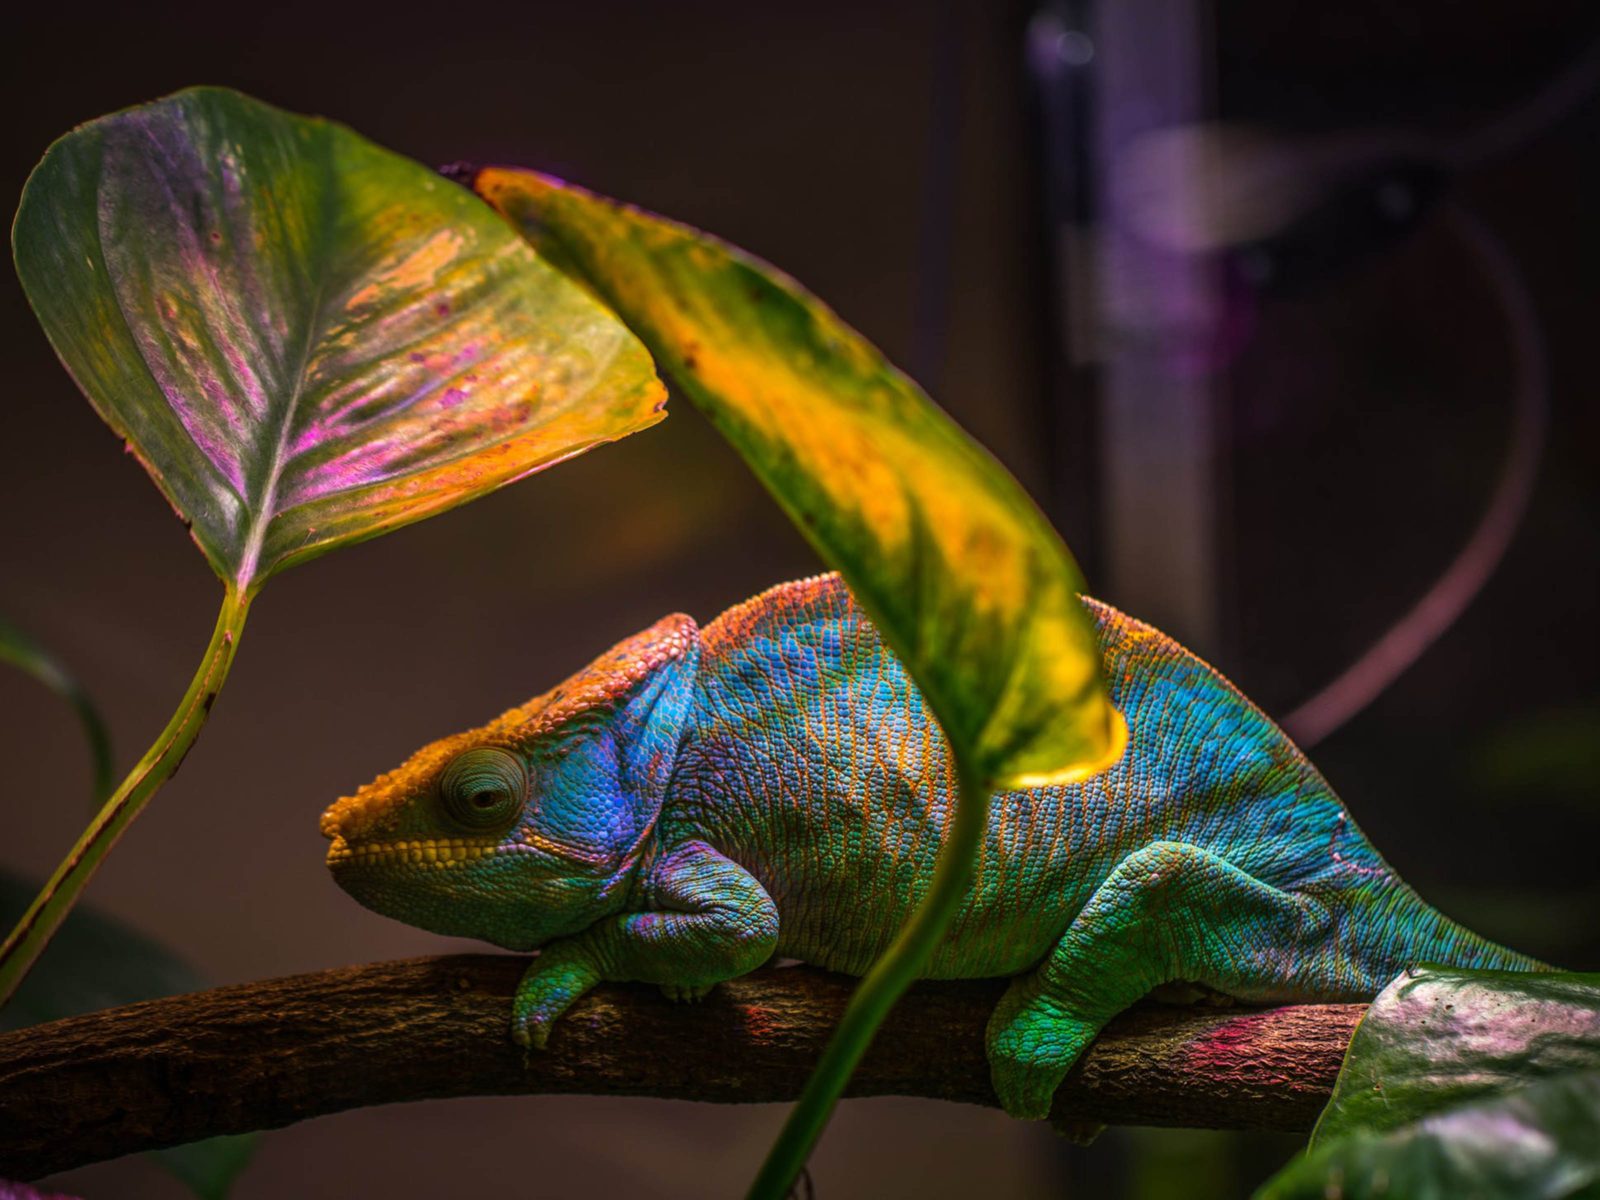 Exotic Animals Reptiles Chameleon That Changes Colors According To The Surroundings Which It Surrounds HD Wallpaper High Definition 3840x2400, Wallpaper13.com